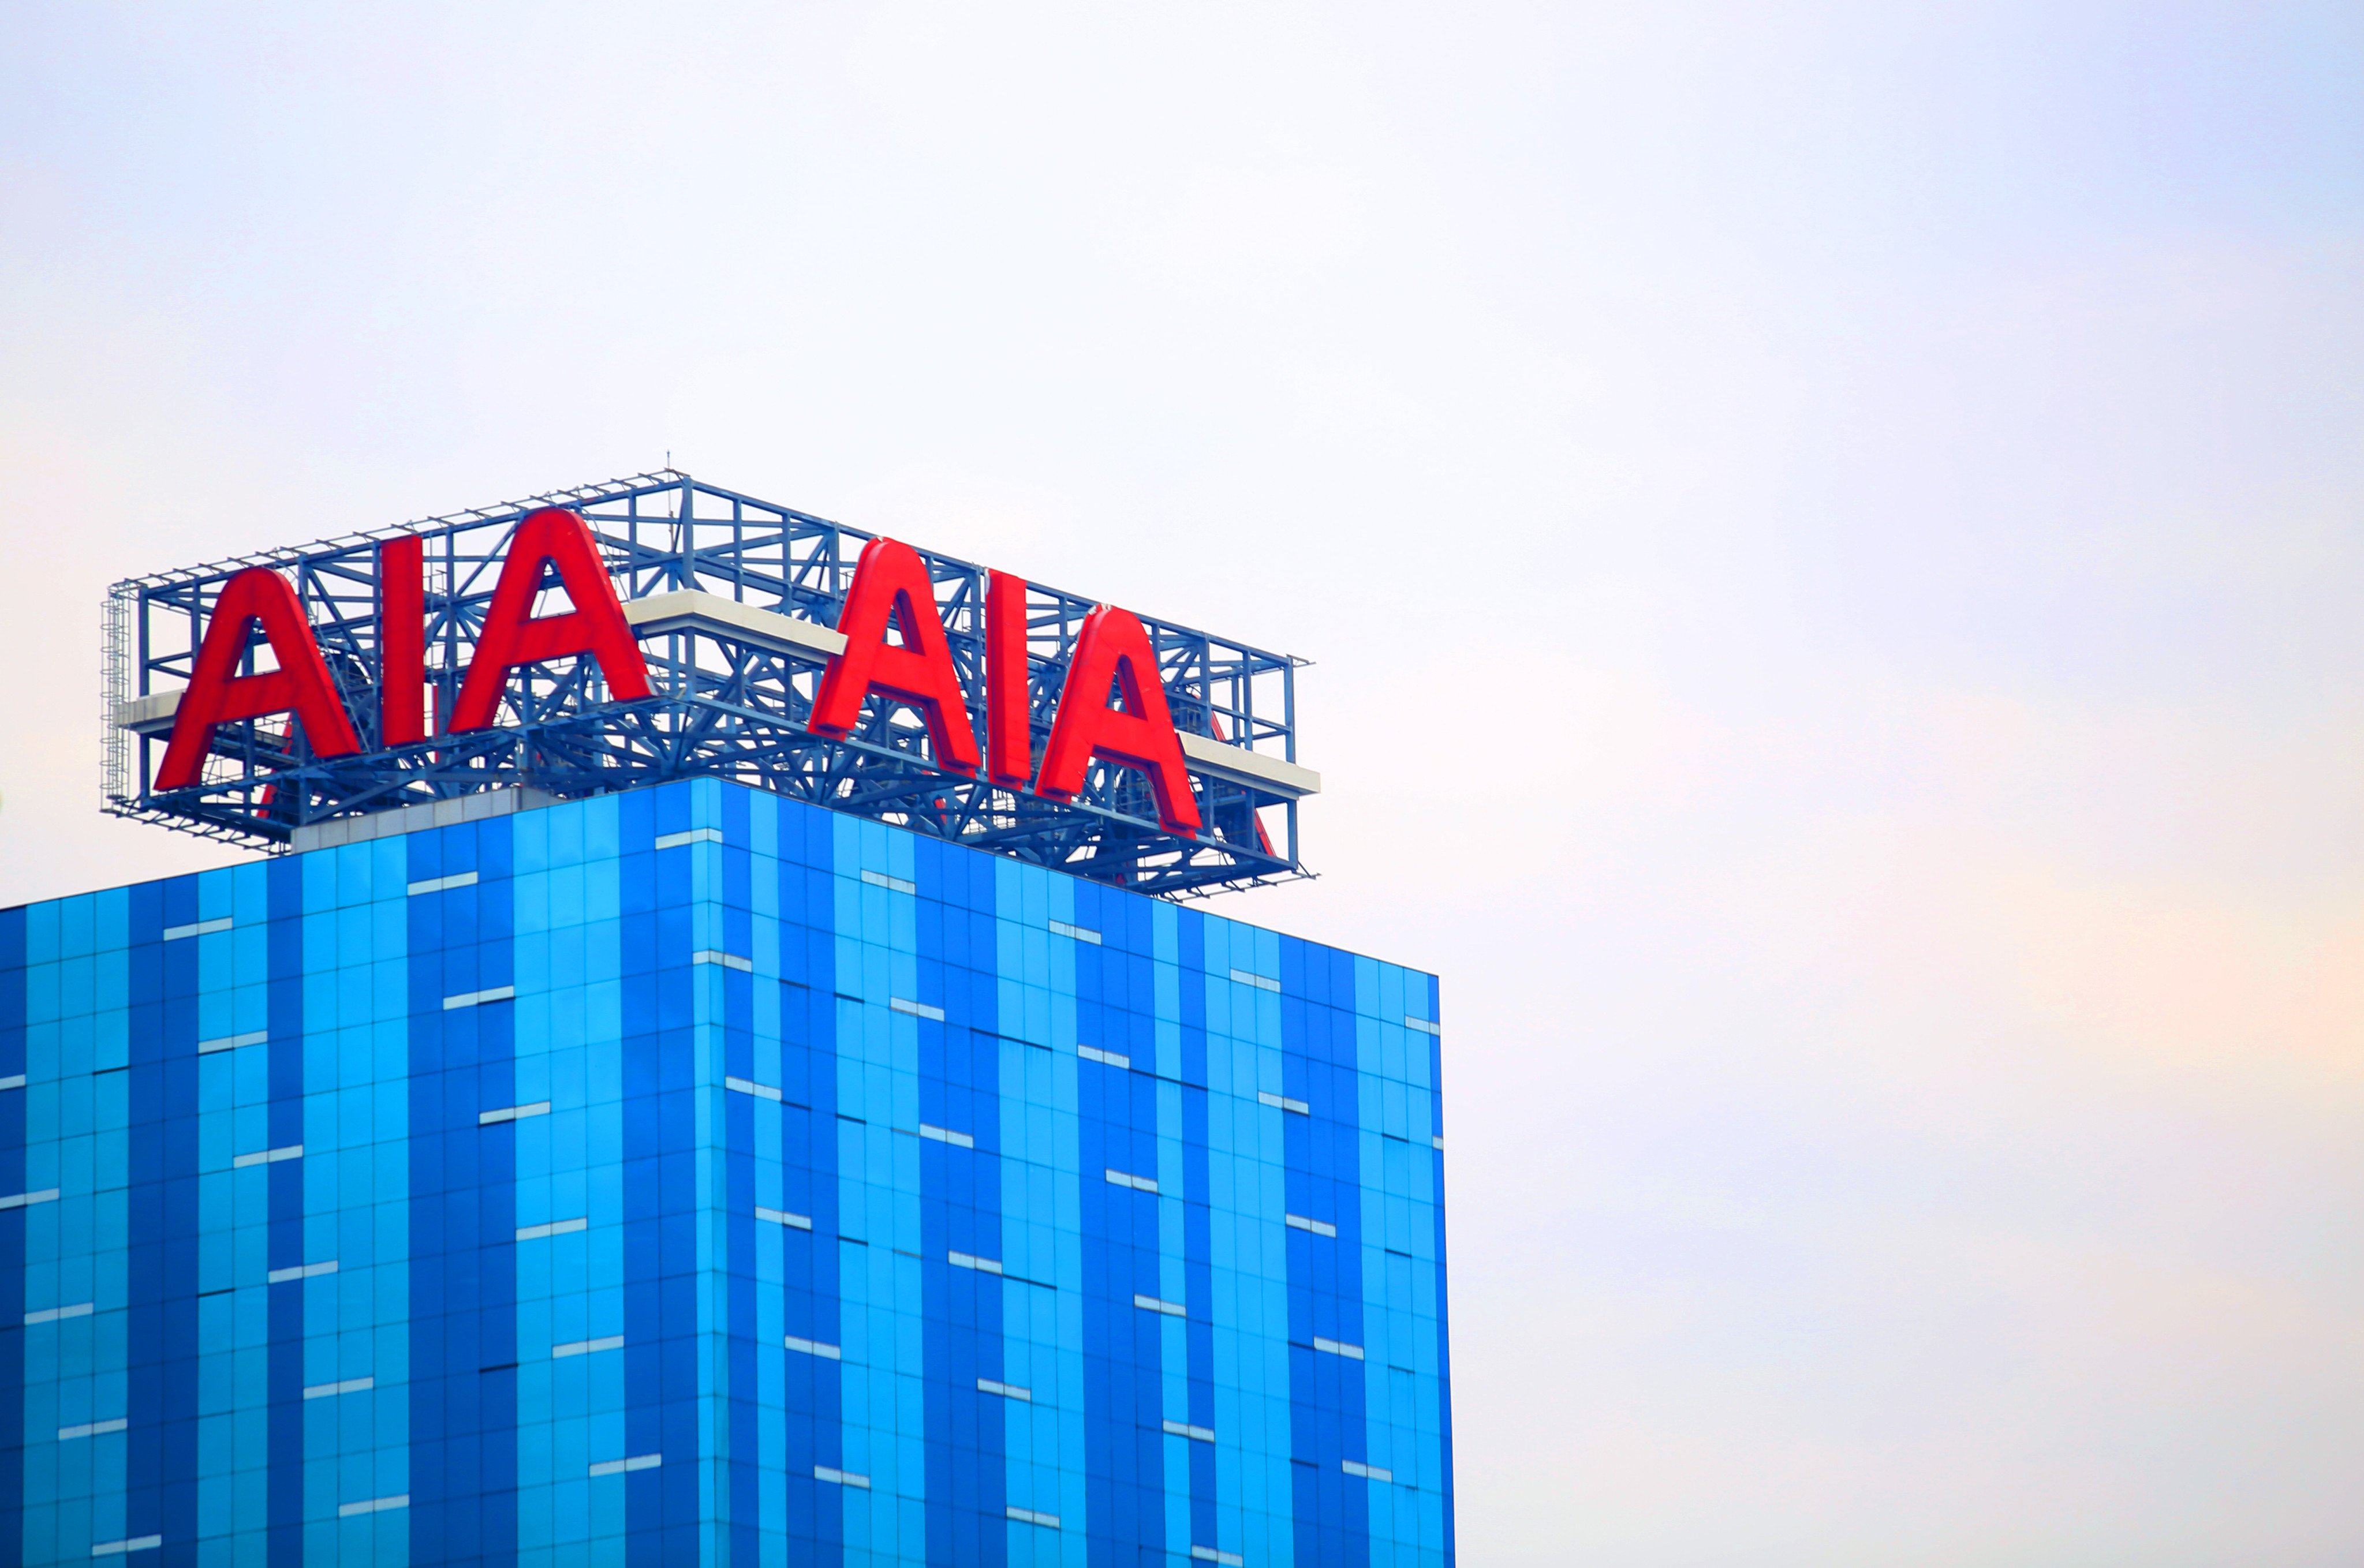 Hong Kong-based AIA Group reported a sizeable jump in the value of new business, a key industry metric. Photo: Shutterstock